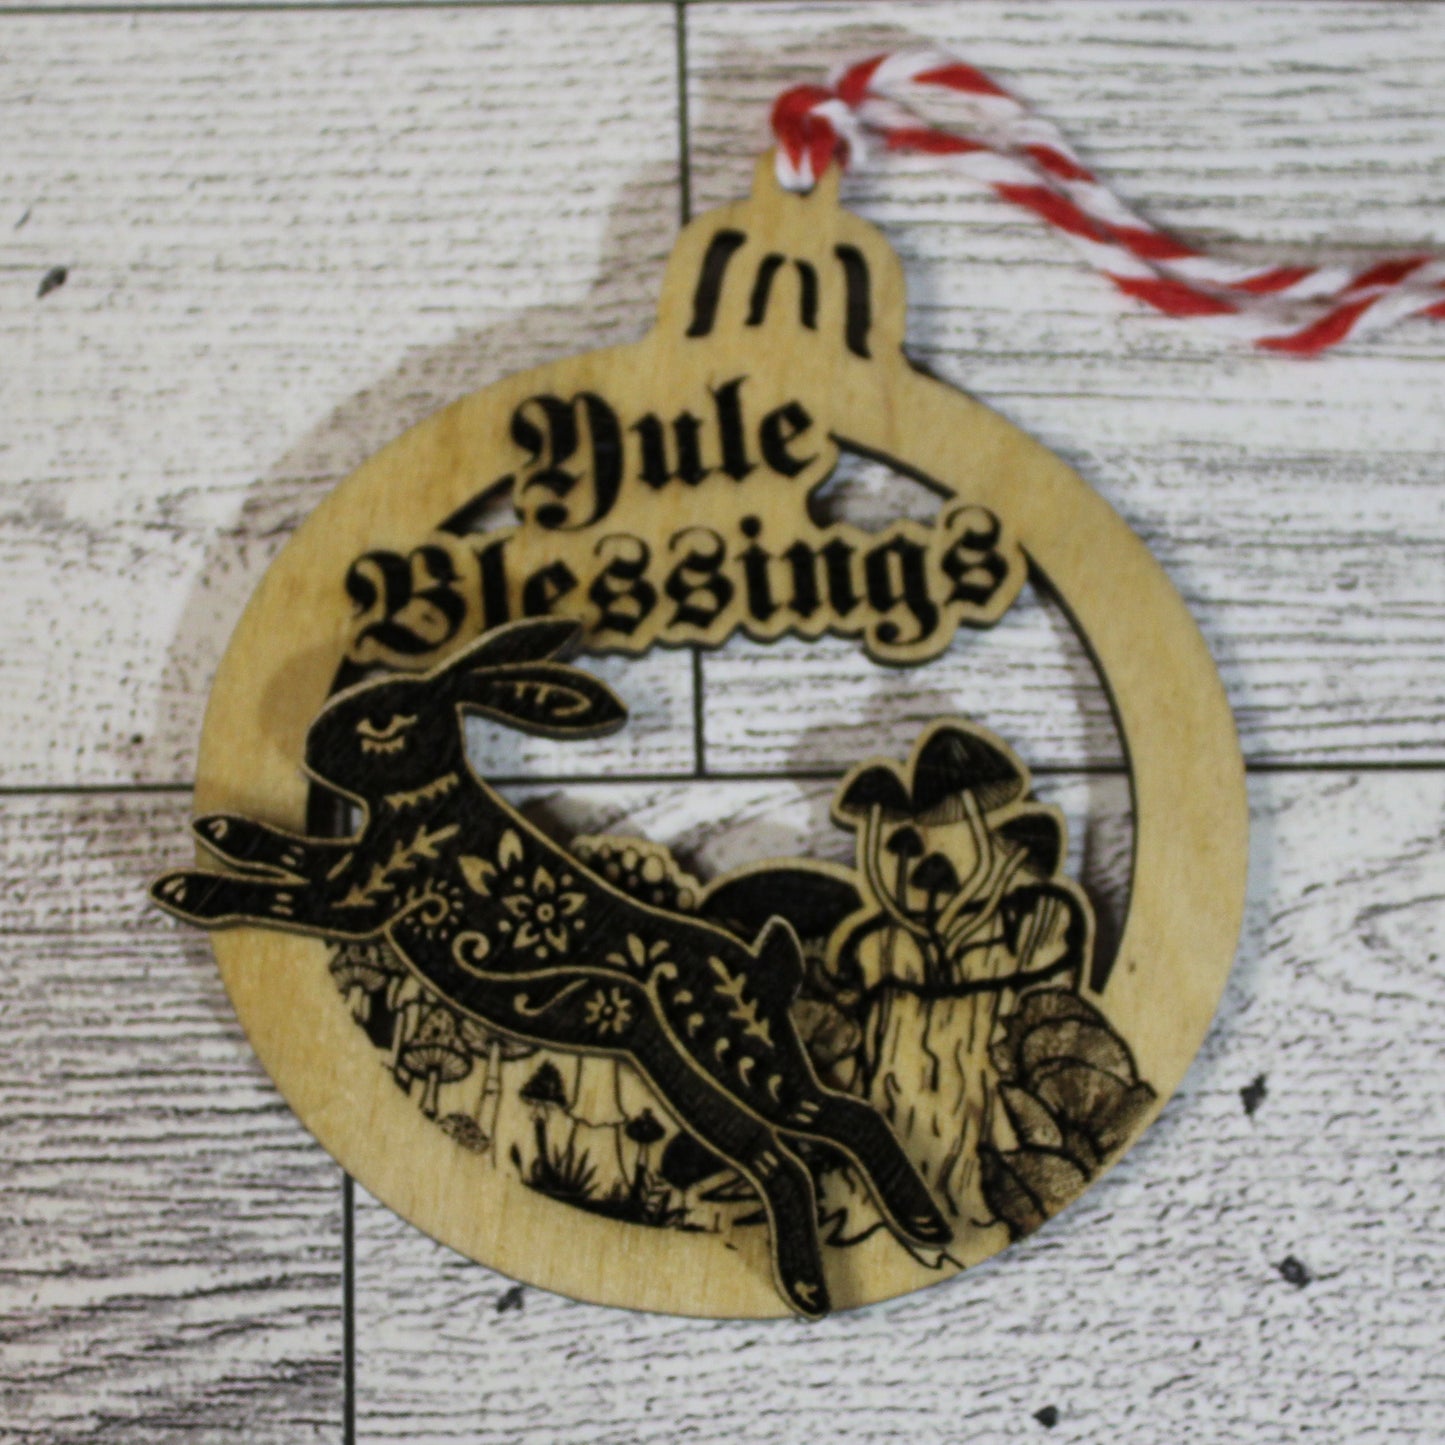 Yule Blessings Hare Ornament